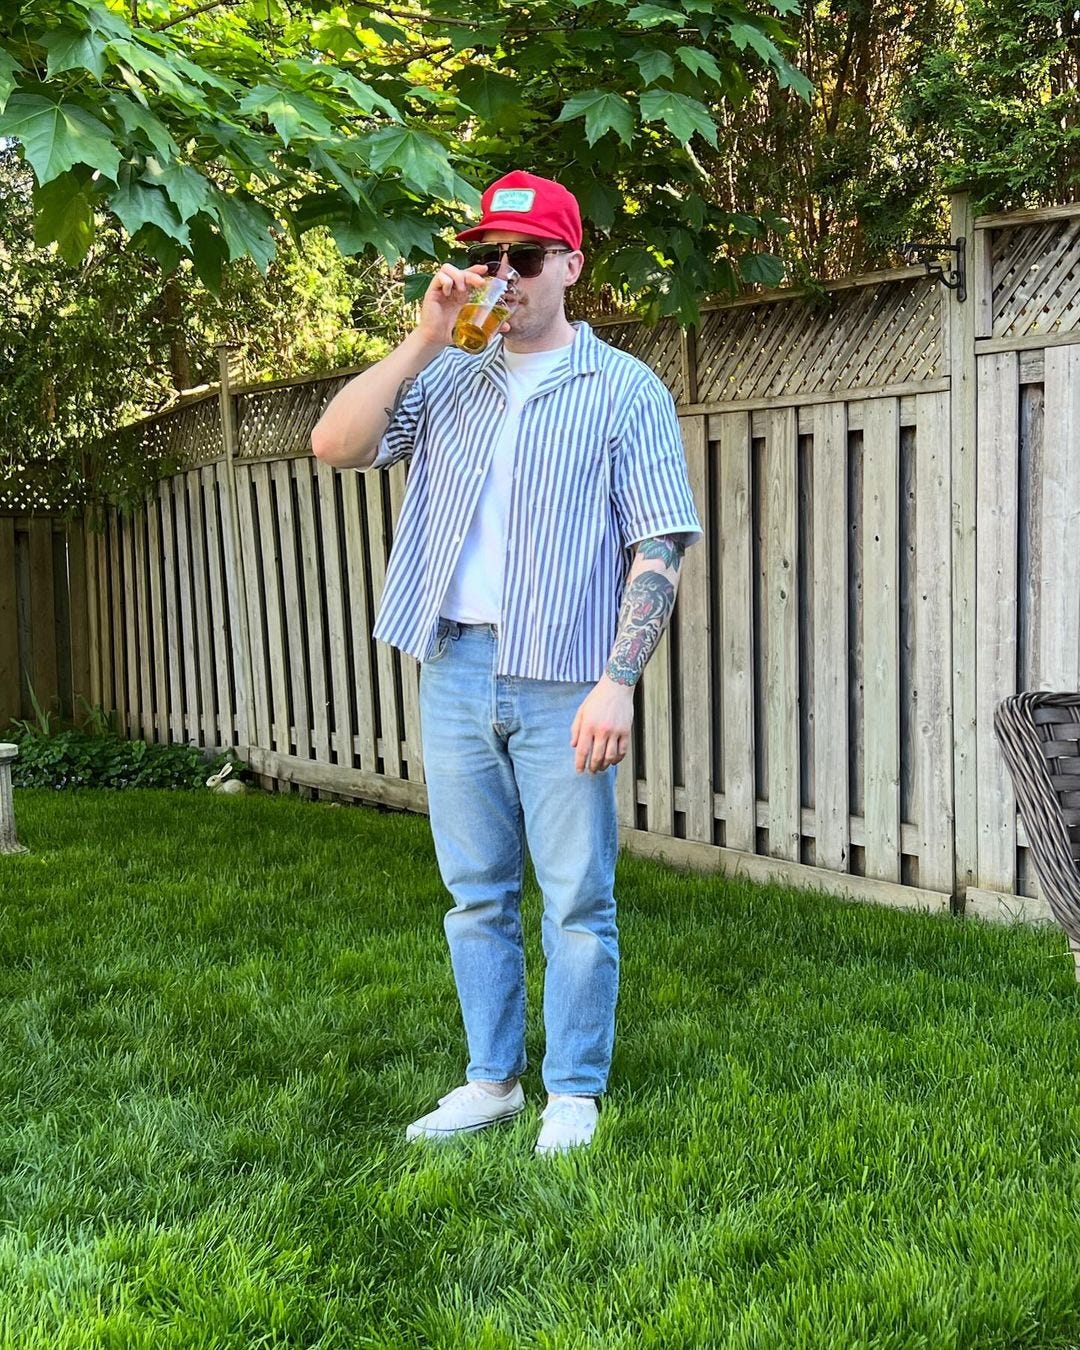 man standing in a backyard in front of a frence, wearing a red cap, blue striped short sleeve shirt, jeans, and white sneakers, drinking a beer